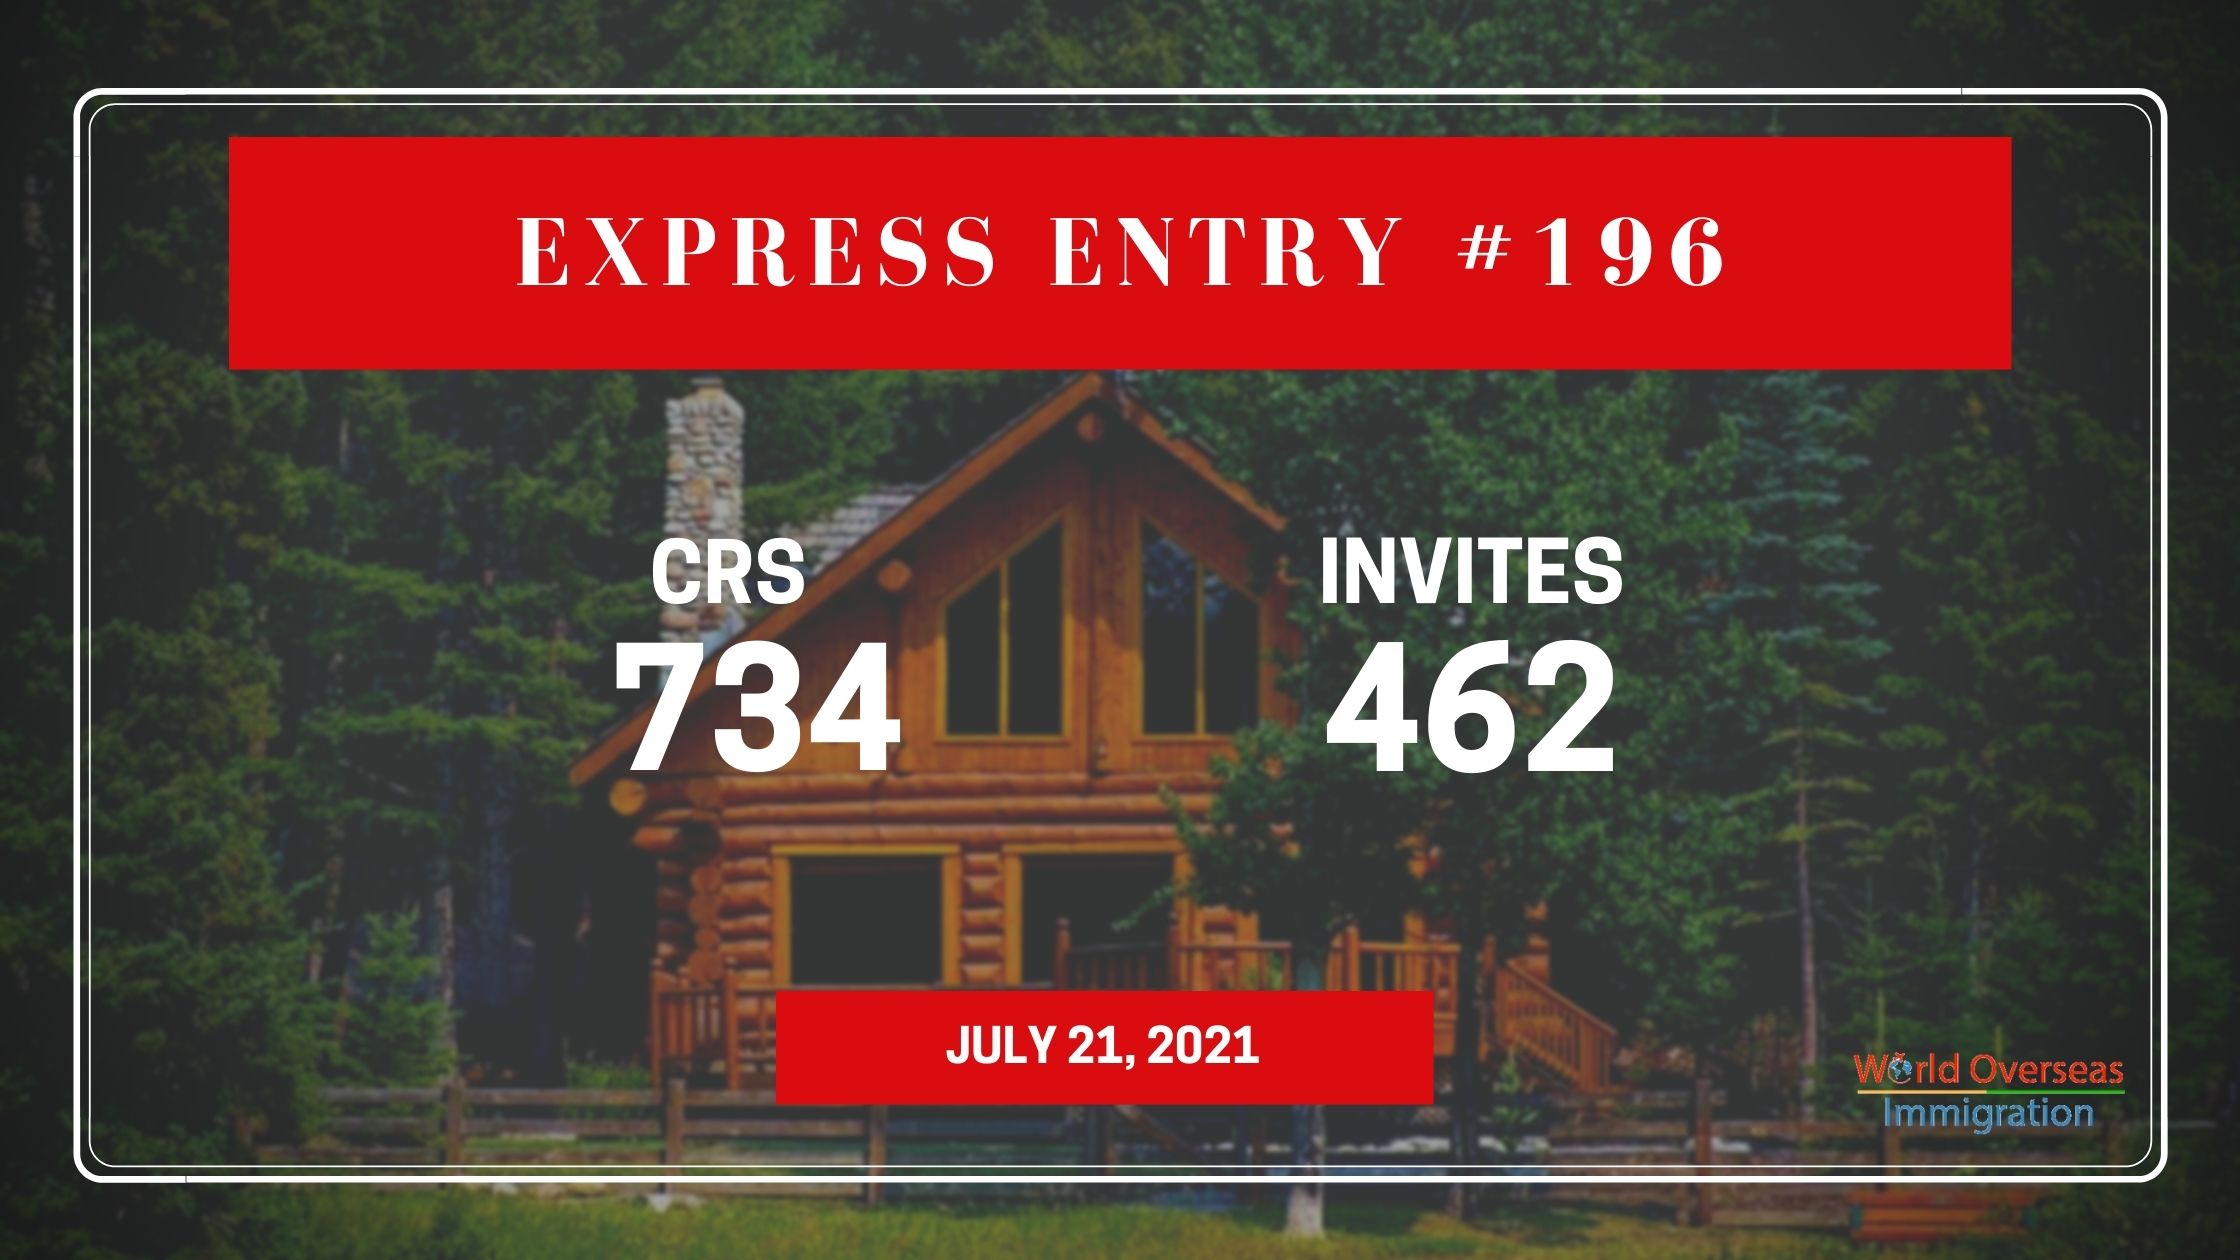 Express Entry #196: 462 PNP candidates are invited in new draw